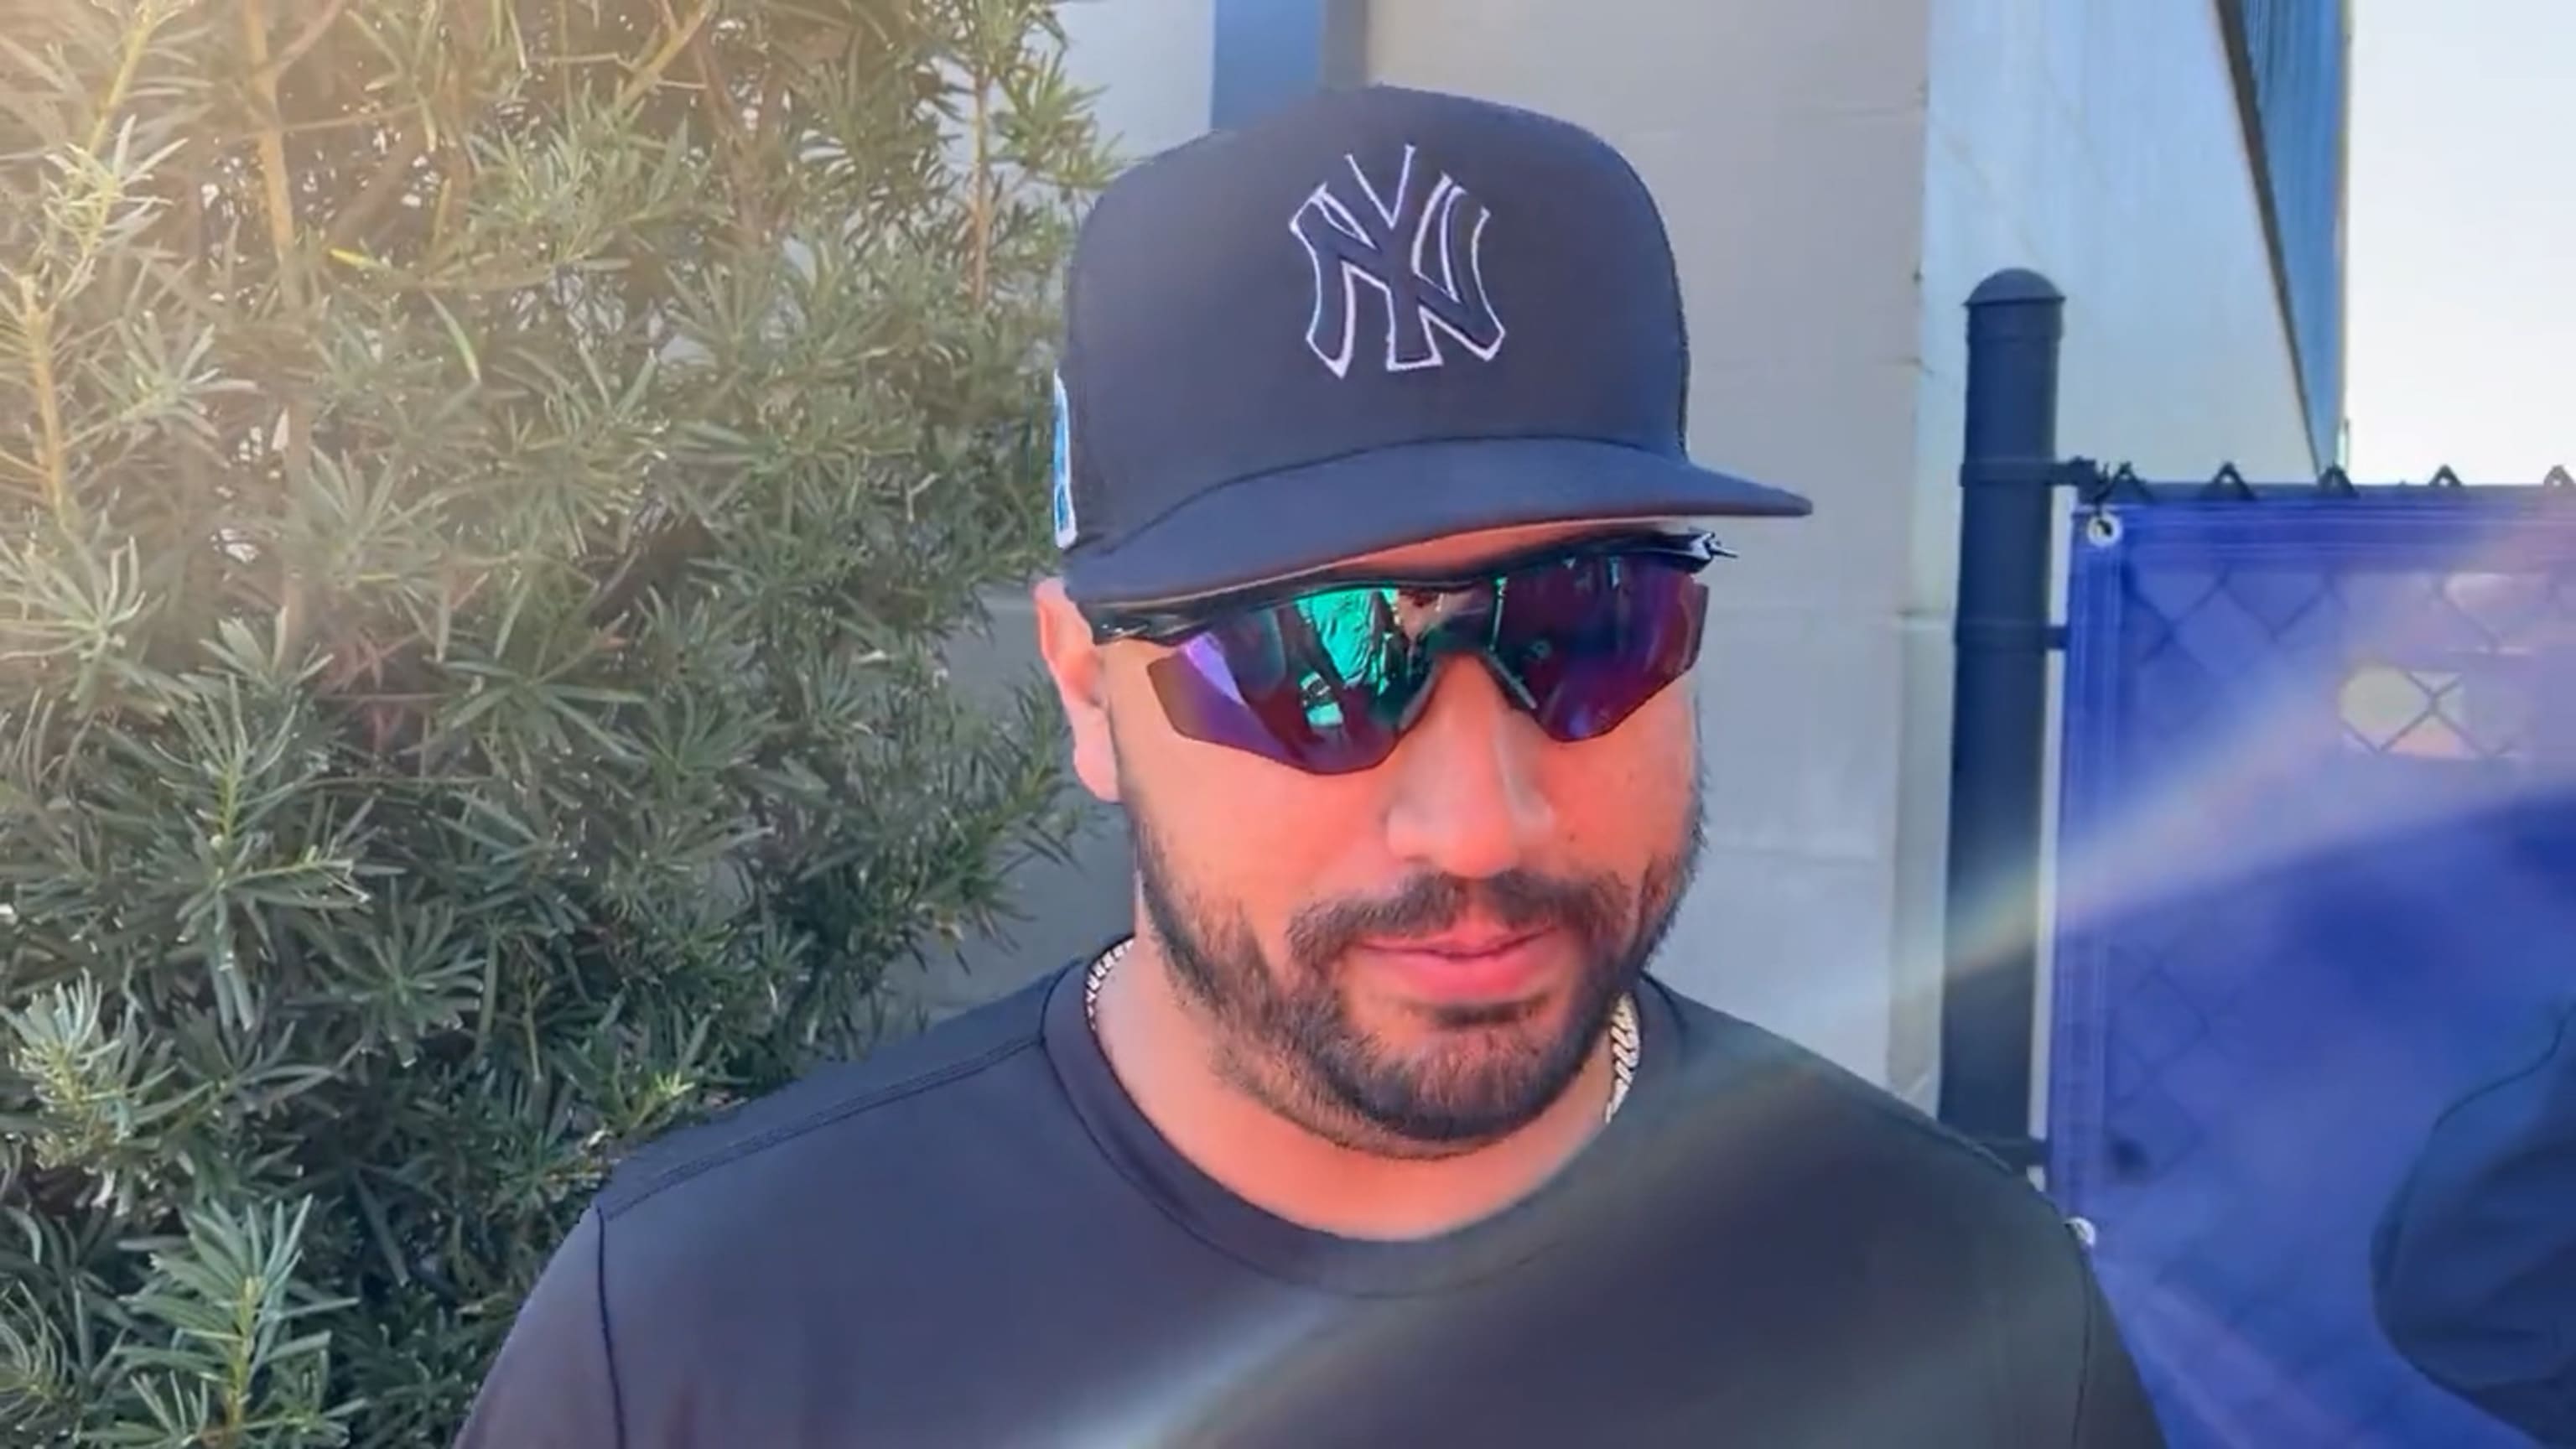 Nestor Cortes opens up on making Yankees start in Miami hometown